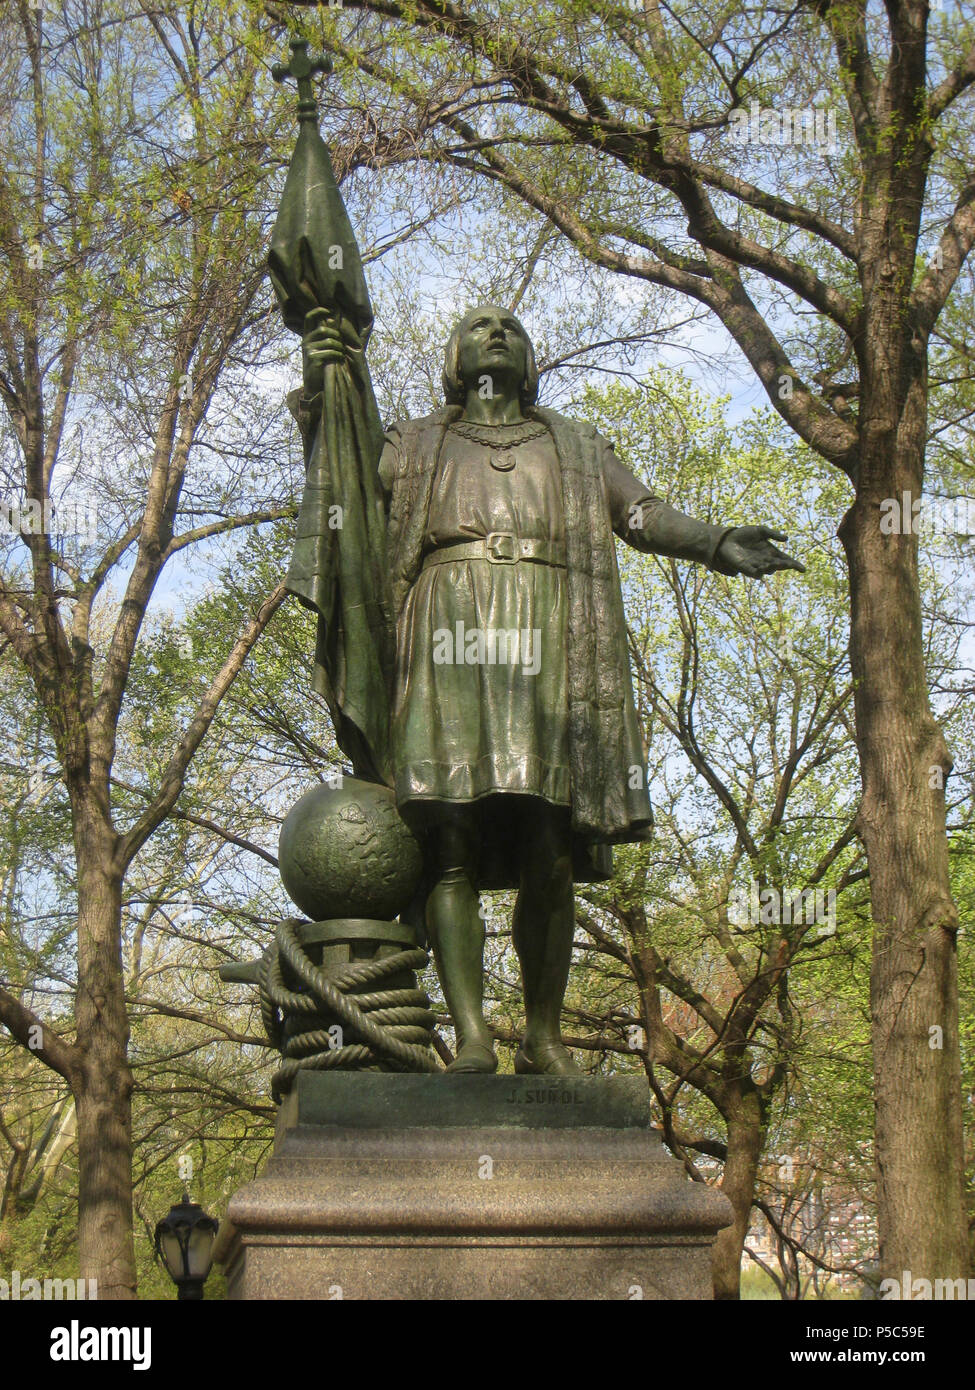 N/A. Christopher Columbus statue by Jerónimo Suñol (1840-1902), Central Park, New York City, New York, USA. Statue dedicated May 12, 1894; photograph taken on April 8, 2010.. Statue by Jerónimo Suñol (1840-1902); I took this photograph. 286 Central Park NYC - Columbus statue by Jeronimo Sunol - IMG 5706 Stock Photo